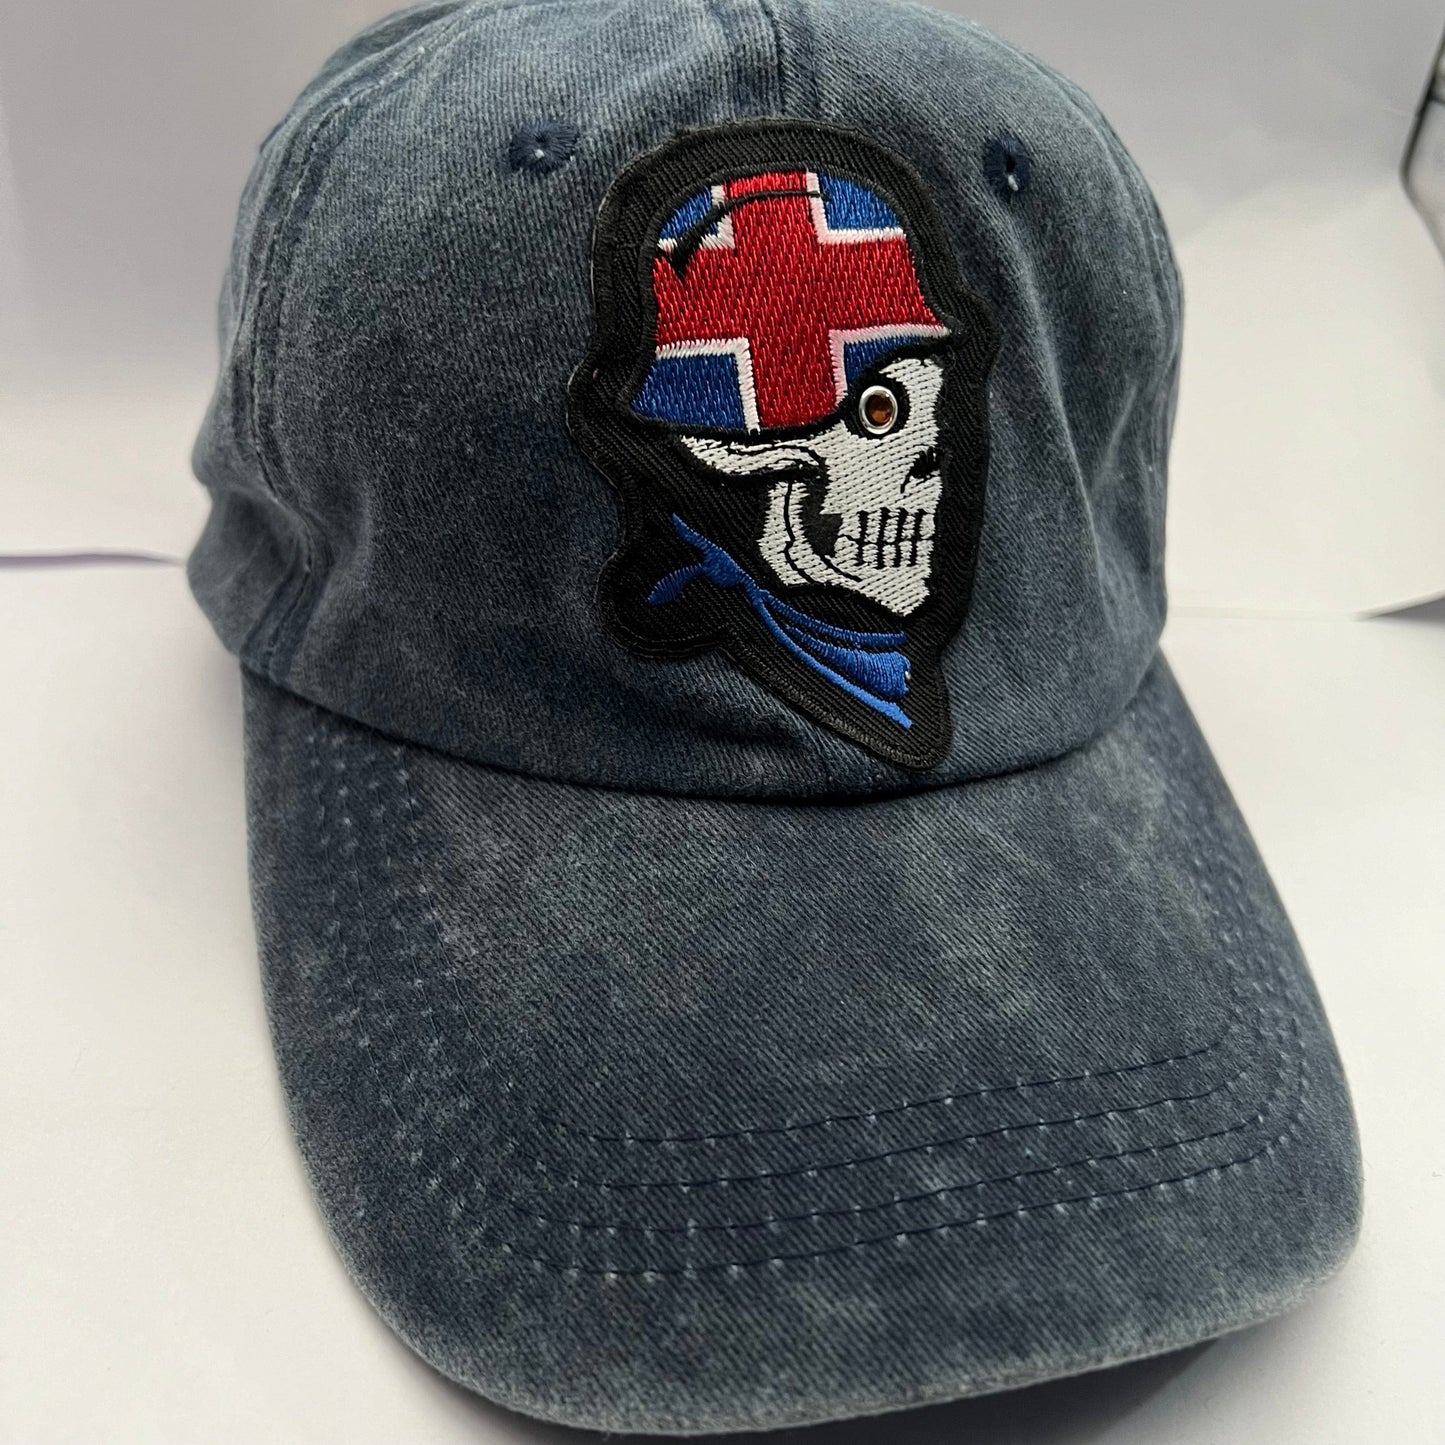 Navy Denim Cap Skull embroidered patch on the hat